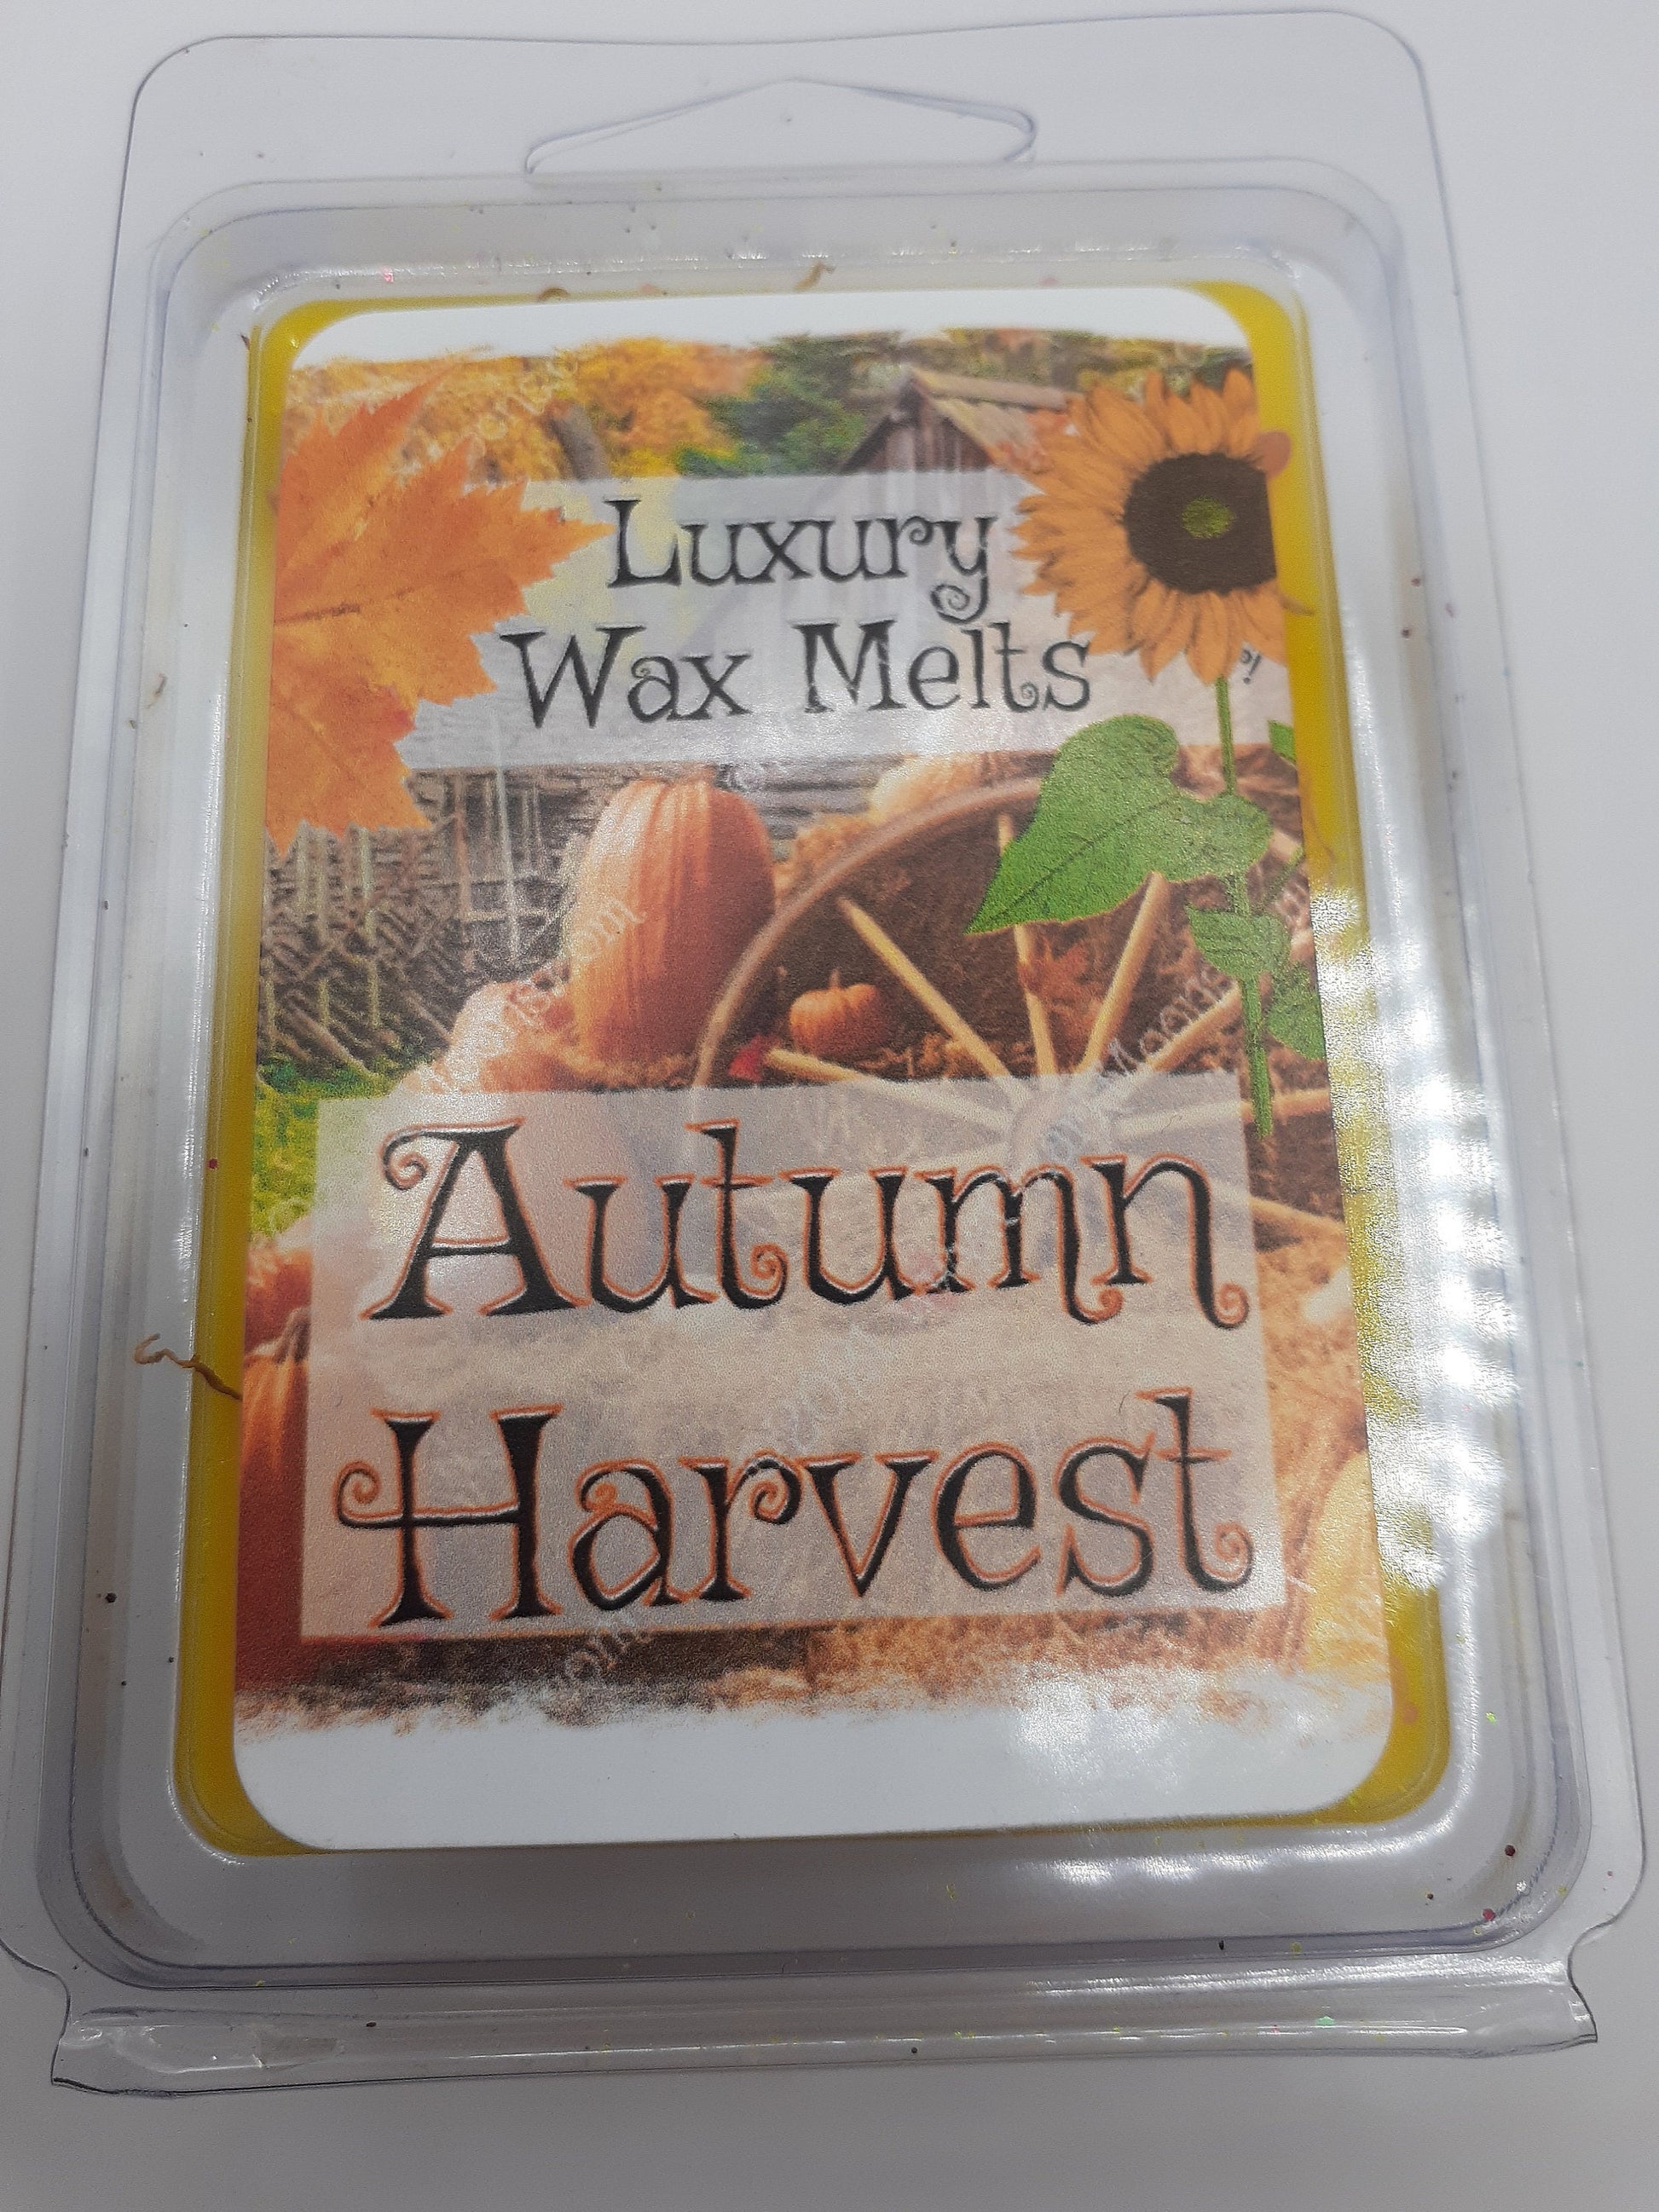 Autumn Harvest Candle or Luxury Wax Melts - Candle Tarts Highly Scented with Fall Leaves, Pumpkin, Apples, Molasses, and Hayrides